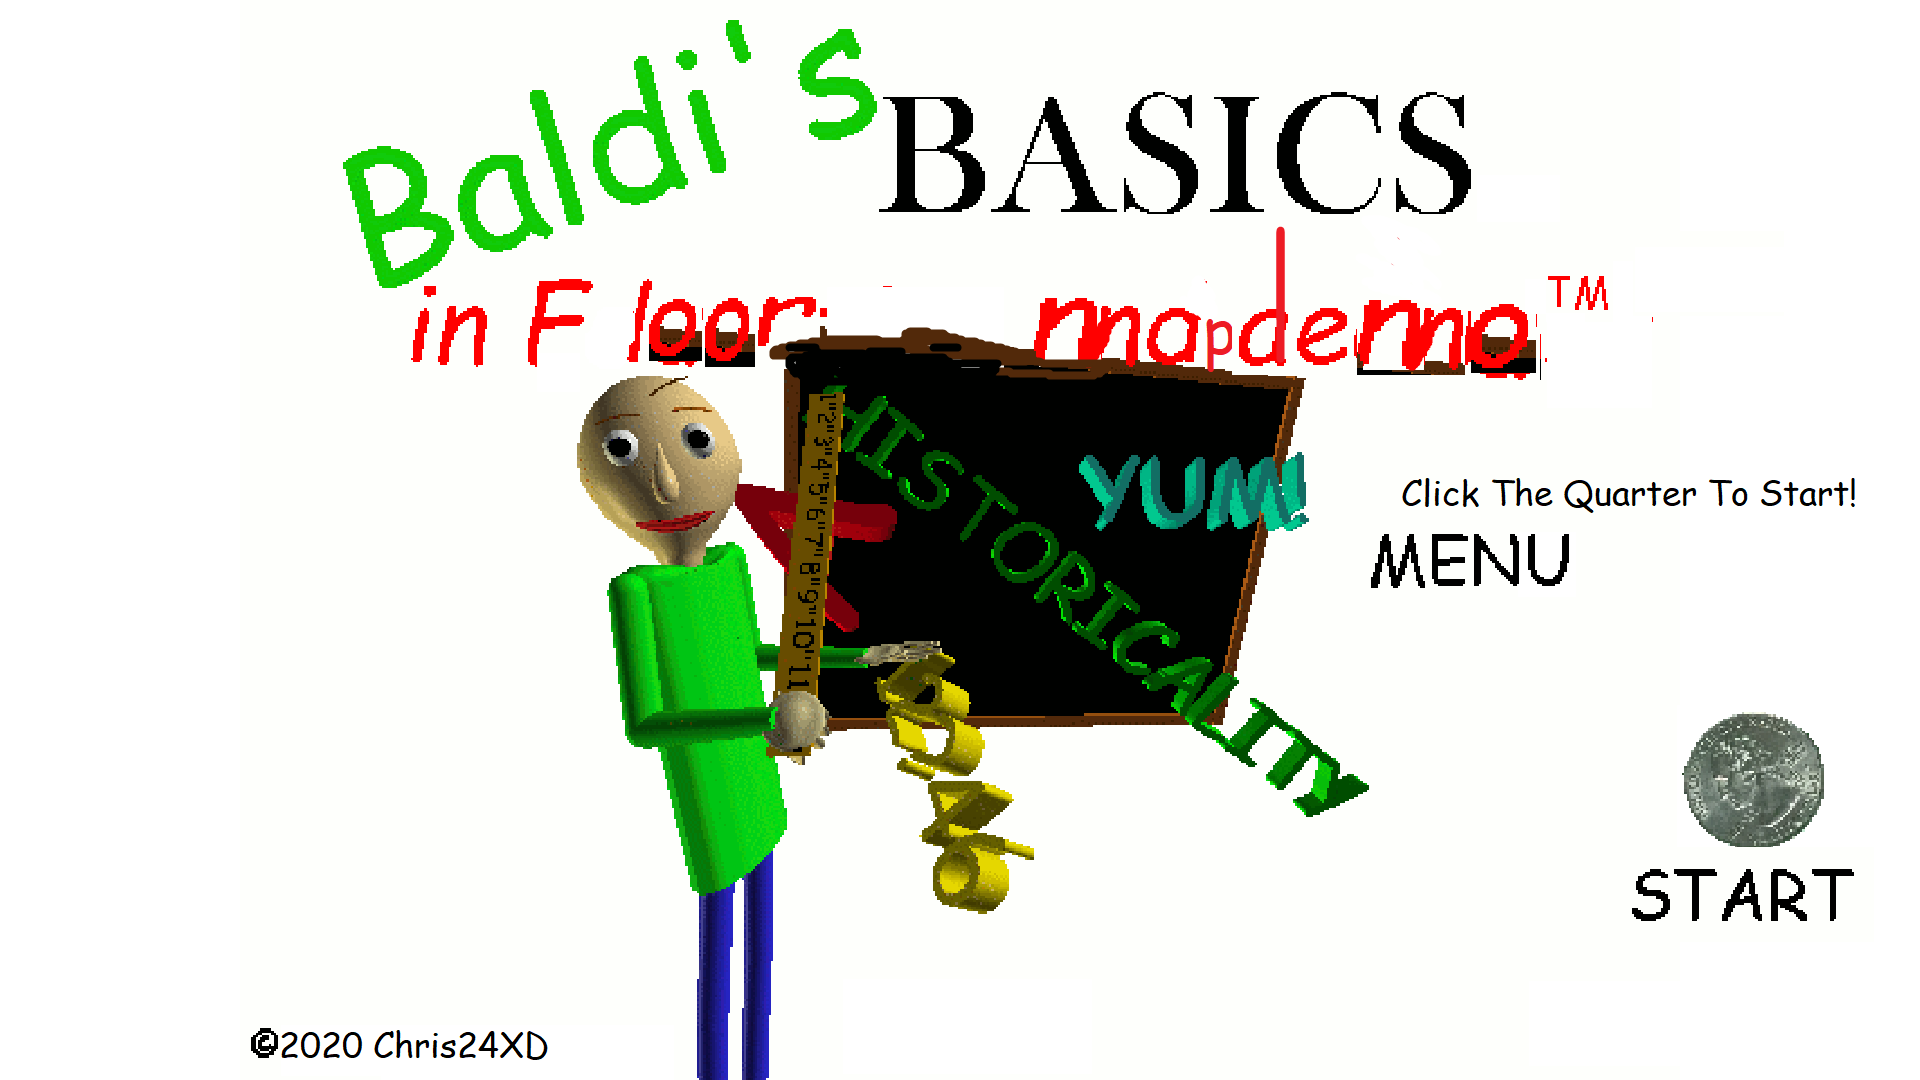 Comments 10 To 1 Of 65 Baldi S Basics Floor Maps Demo By Chris24xd - baldis basics field trip map press the roblox